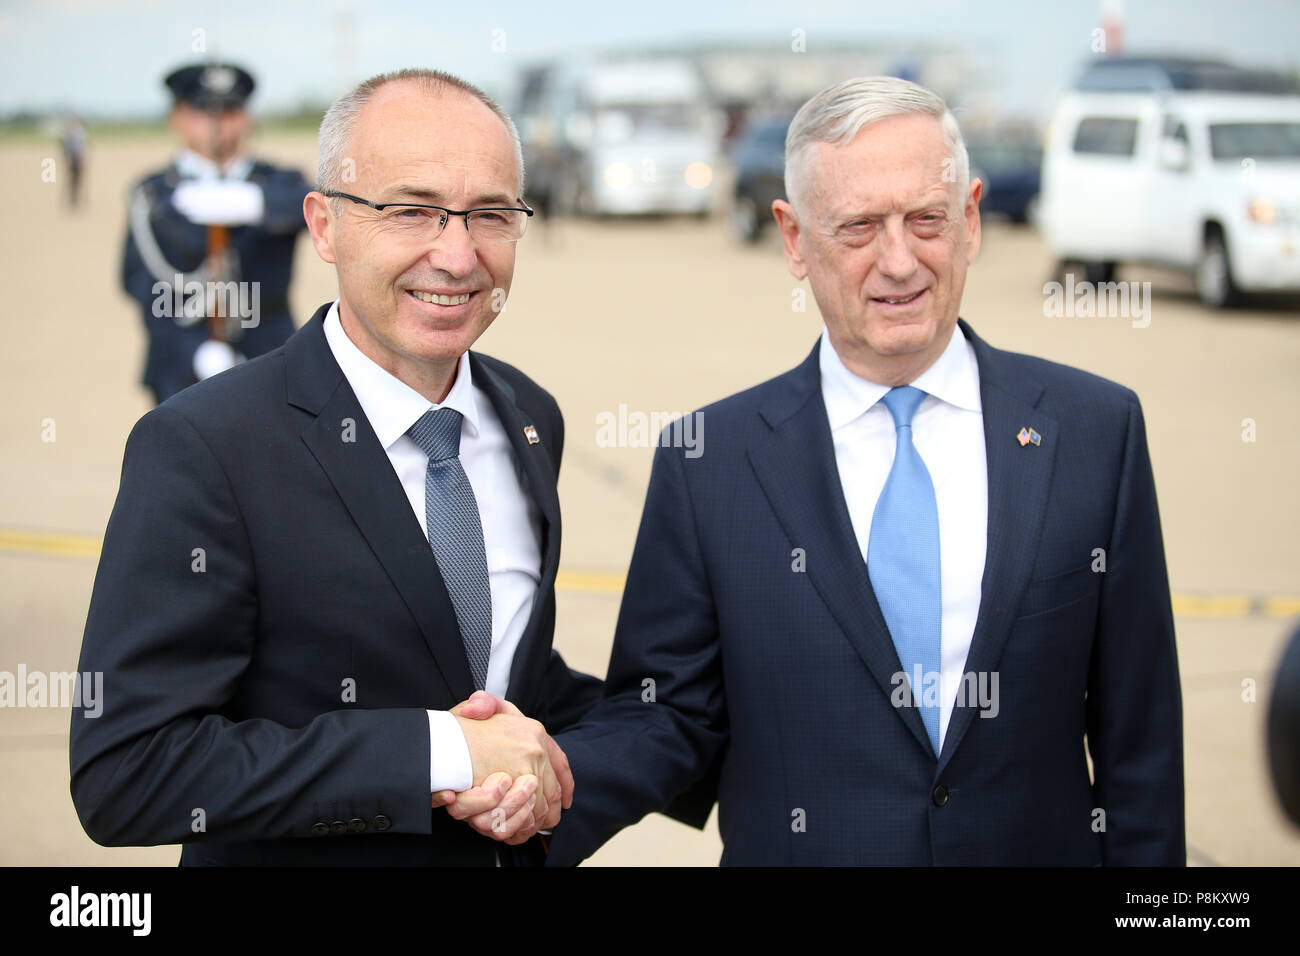 Zagreb, Croatia. 12th July, 2018. Croatian Defense Minister Damir Krsticevic (L) shakes hands with visiting U.S. Secretary of Defense James Mattis in Zagreb, Croatia, on July 12, 2018. James Mattis on Thursday promised to assist in modernizing Croatian armed forces. Credit: Petar Glebov/Xinhua/Alamy Live News Stock Photo